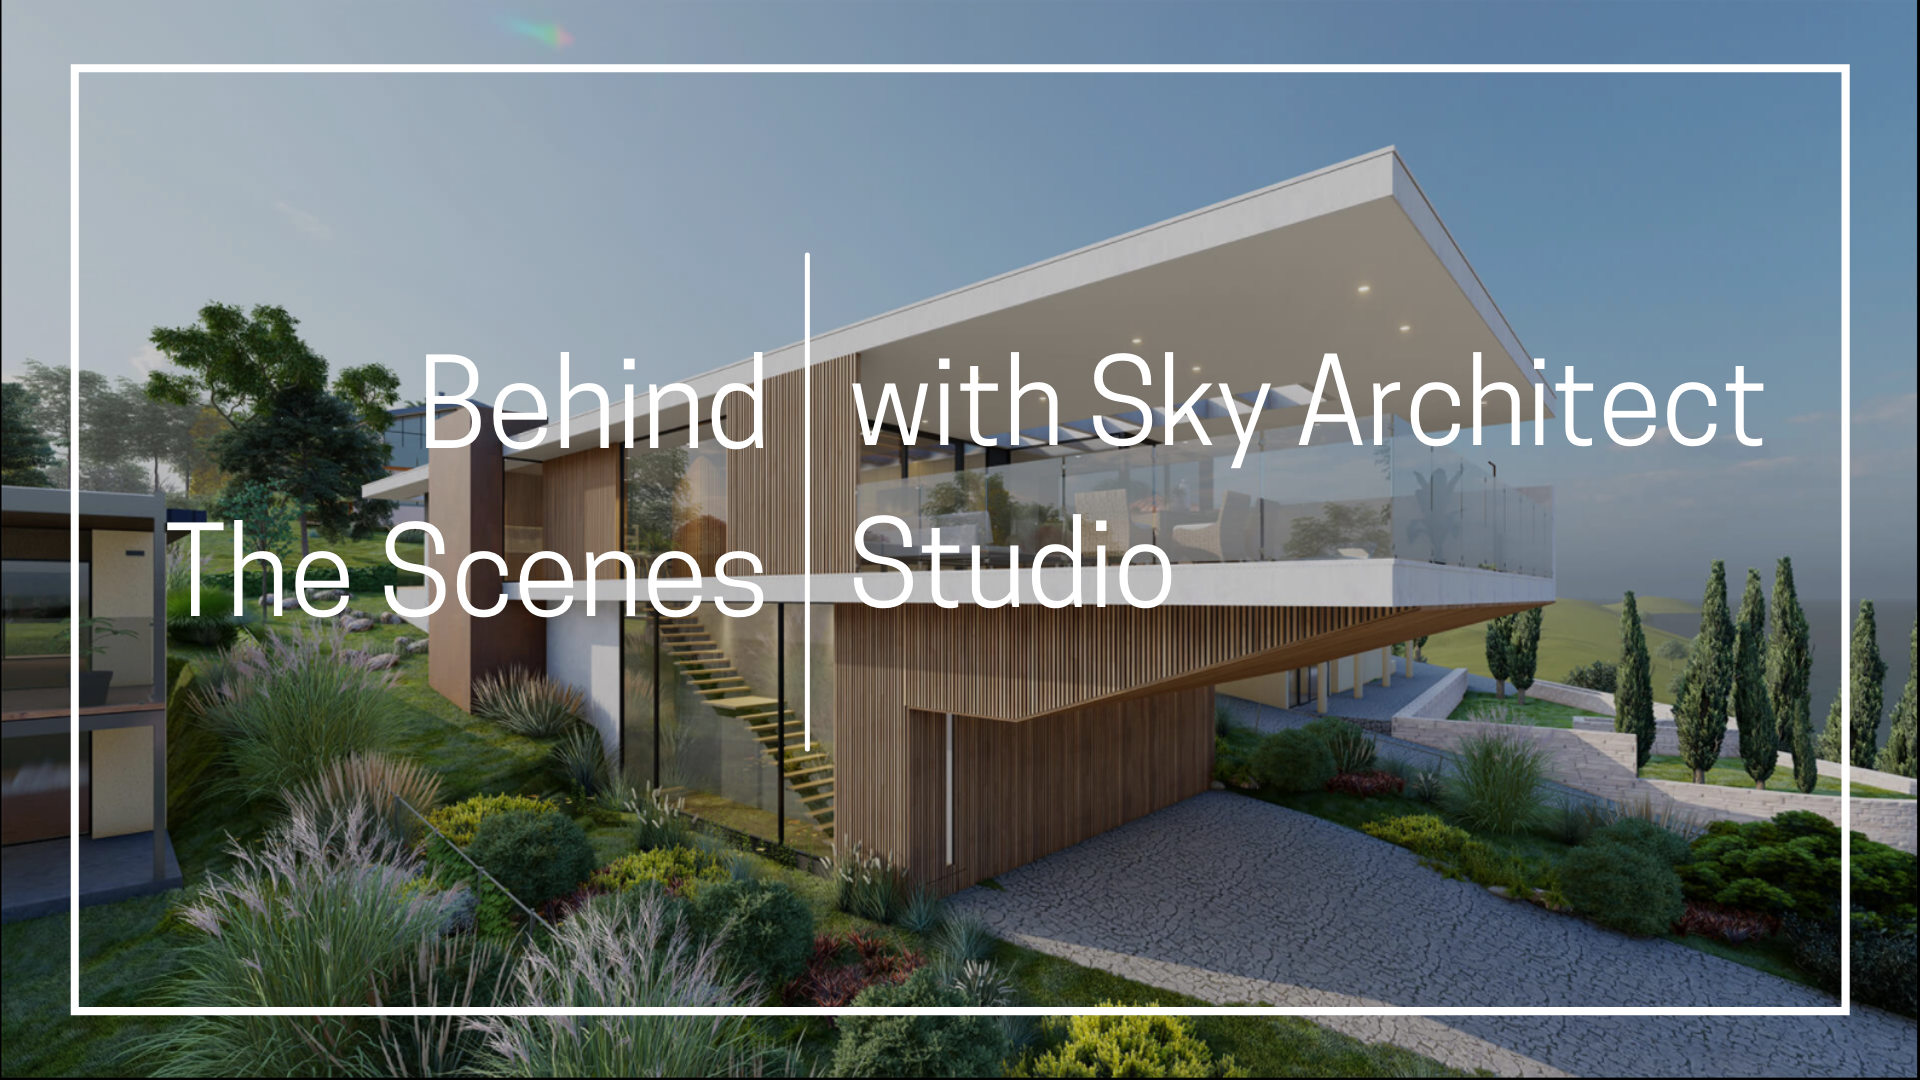 PENDING: Behind the Scenes with Sky Architect Studio